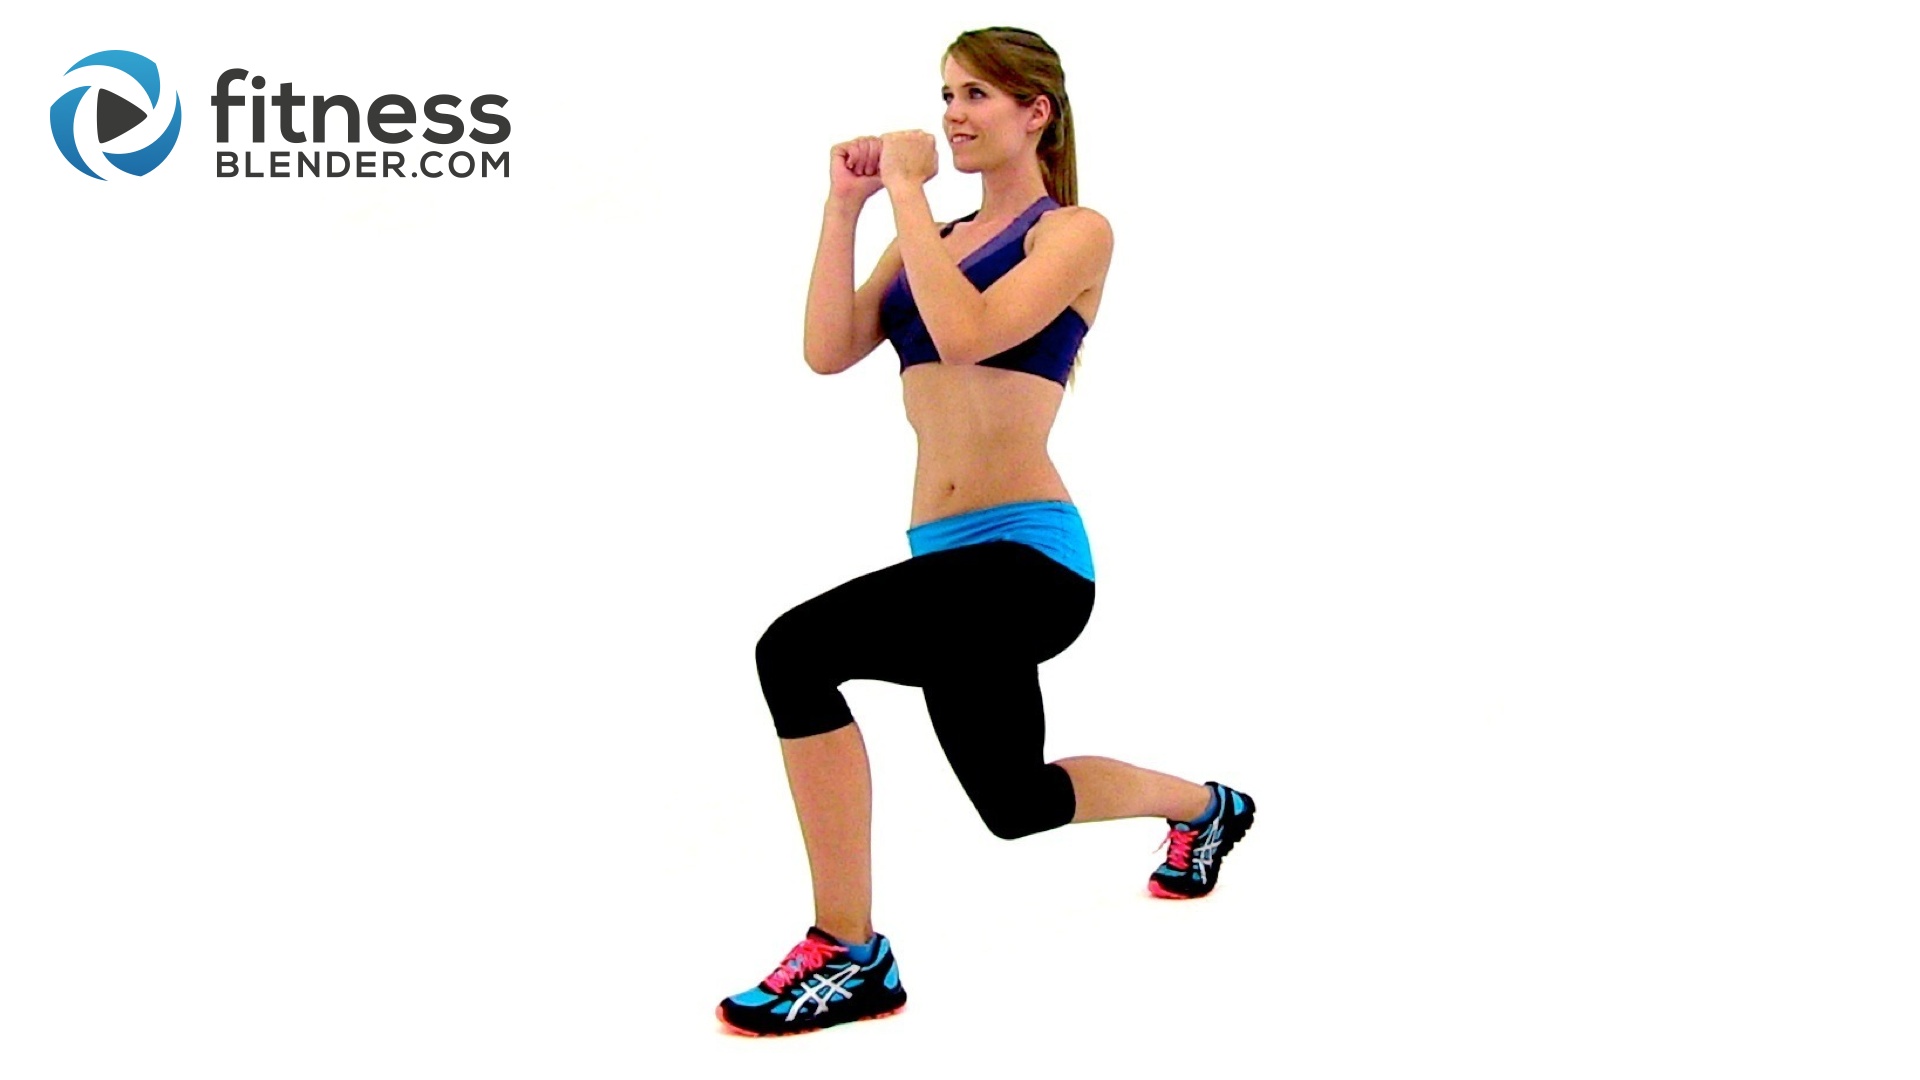 5 Minutes To A Bigger Rounder Butt Glute And Thigh Workout For A 